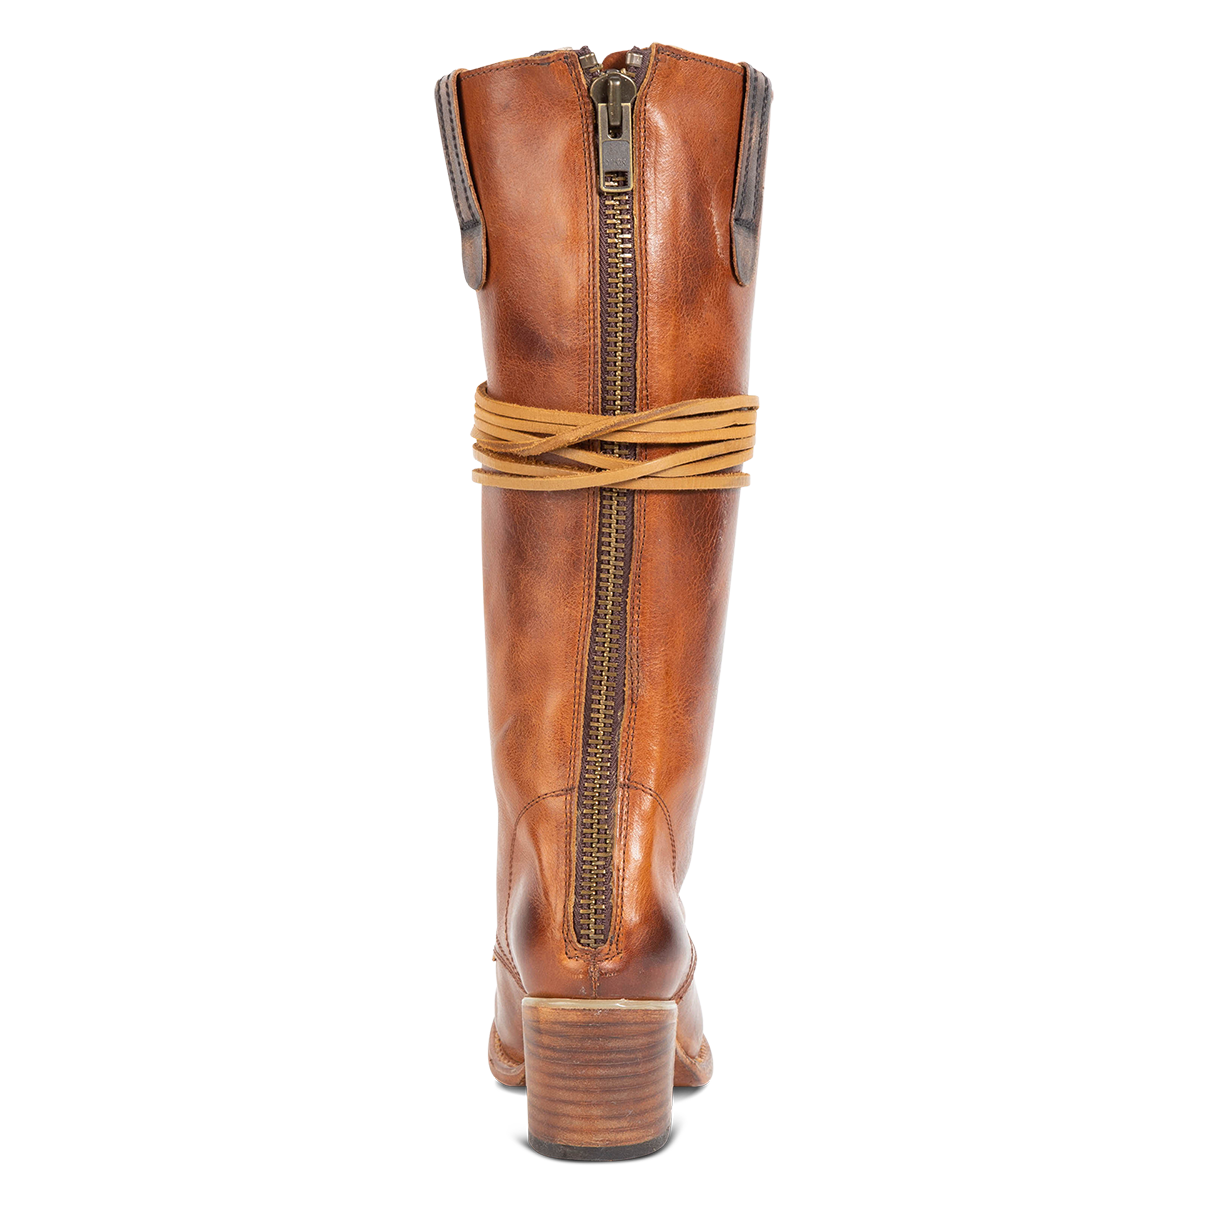 Back view showing brass zip closure and red leather pull tab on FREEBIRD women's Grany cognac tall boot